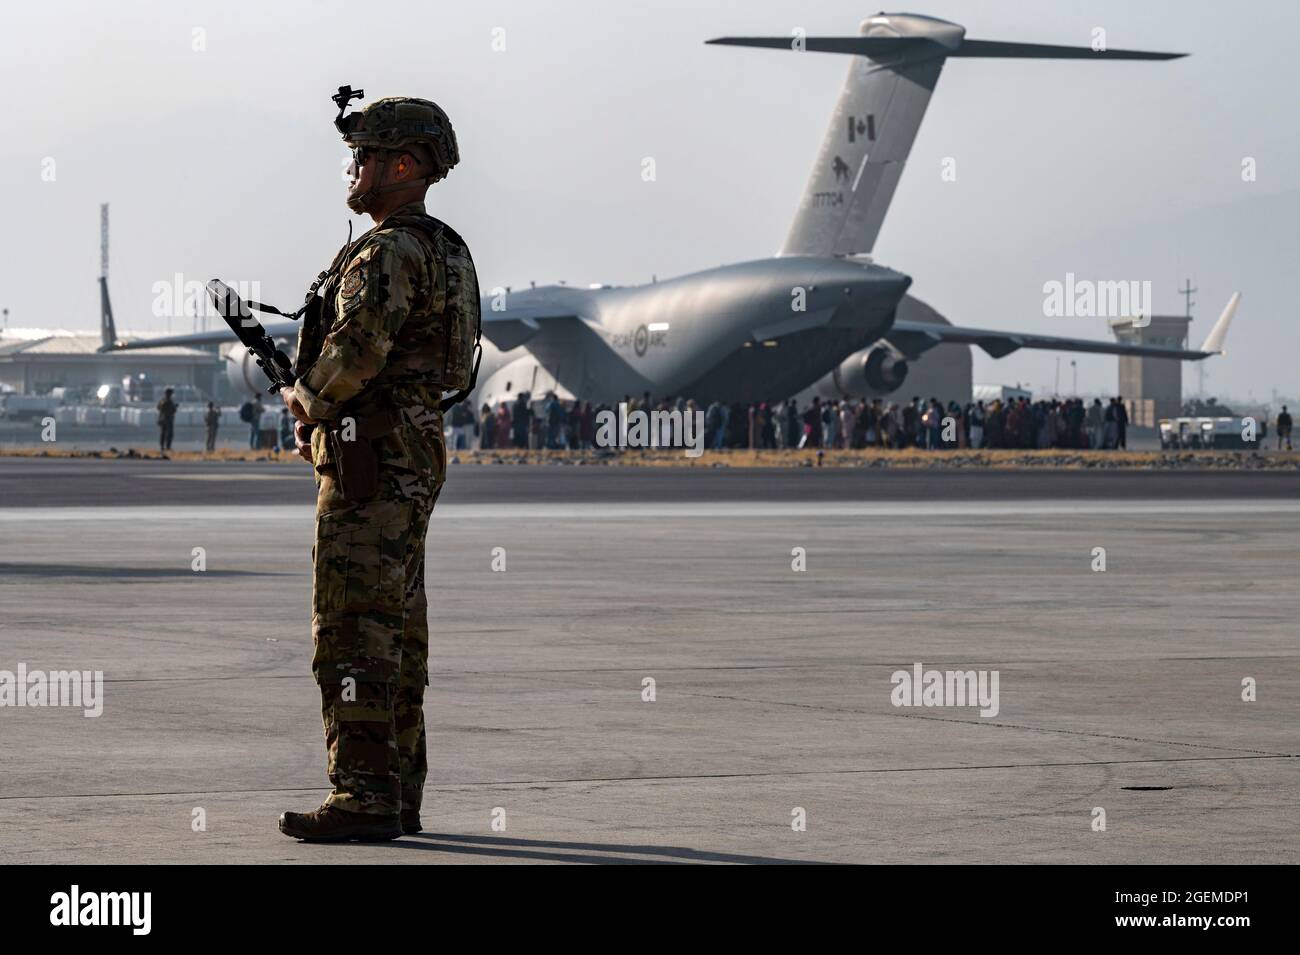 A U.S. Air Force security forces raven, assigned to the 816th Expeditionary Airlift Squadron, maintains a security cordon around a U.S. Air Force C-17 Globemaster III aircraft in support of Operation Allies Refuge at Hamid Karzai International Airport (HKIA), Afghanistan, Aug. 20, 2021. The Department of Defense is committed to supporting the U.S. State Department in the departure of U.S. and allied civilian personnel from Afghanistan, and to evacuate Afghan allies safely. (U.S. Air Force photo by Senior Airman Taylor Crul) Stock Photo